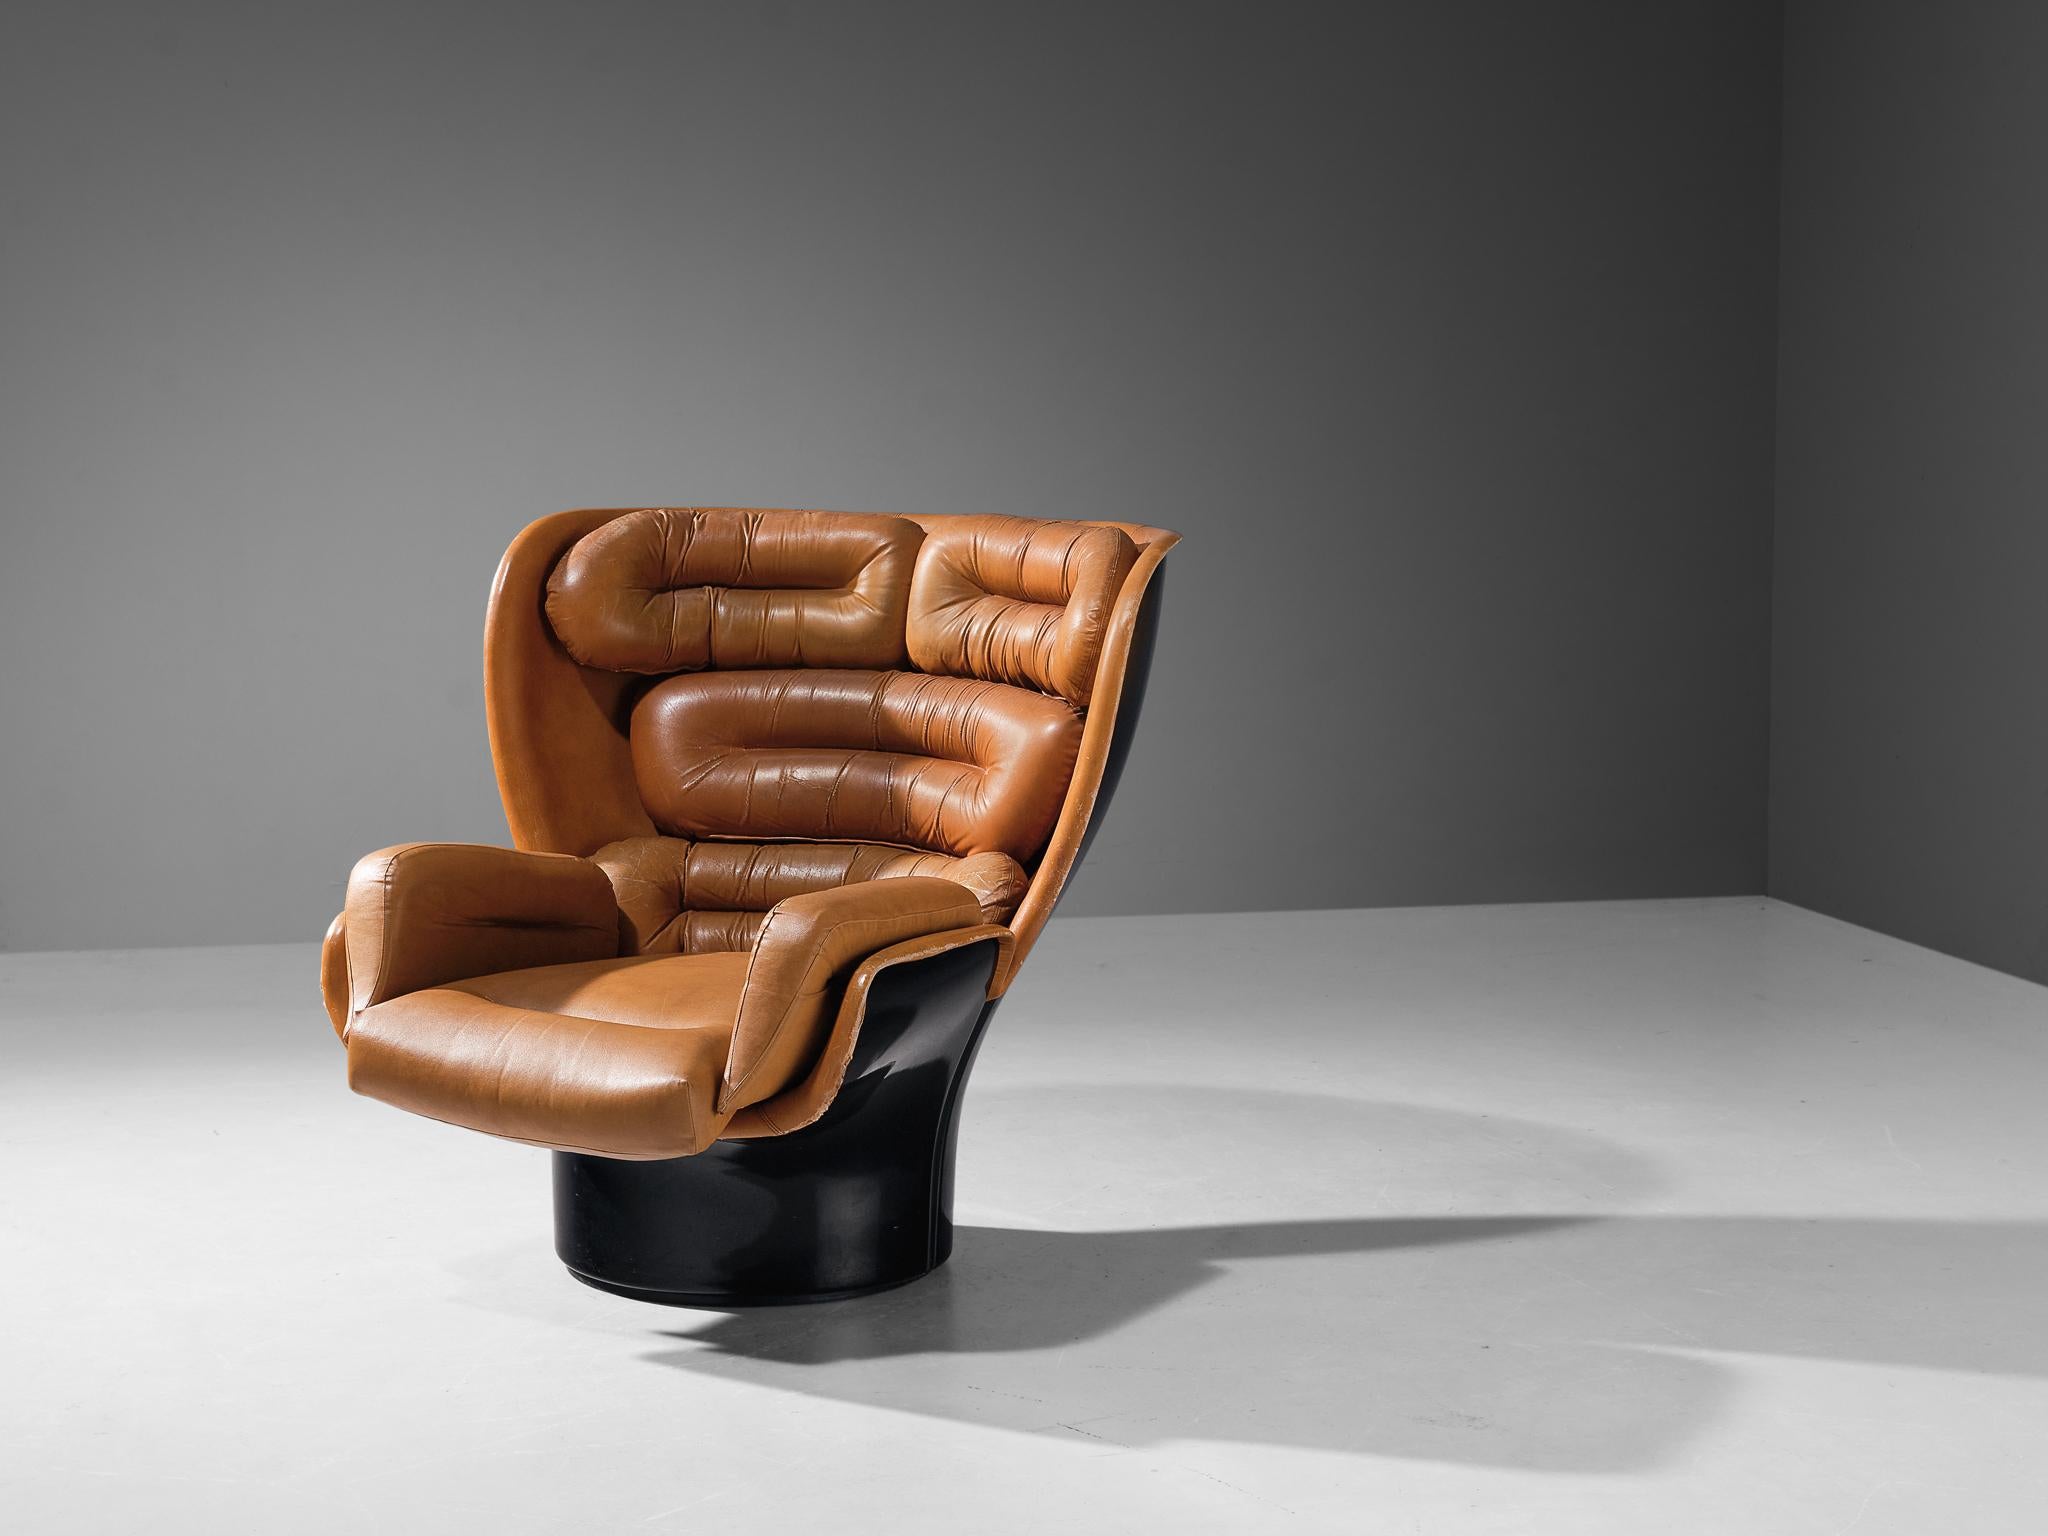 Joe Colombo for Comfort, lounge chair model ‘Elda’, fiberglass, leather, Italy, design 1963, later production.

The ‘Elda’ chair is one of the most well-known designs of Italian designer Joe Colombo. This lounge chair is one of the first designs